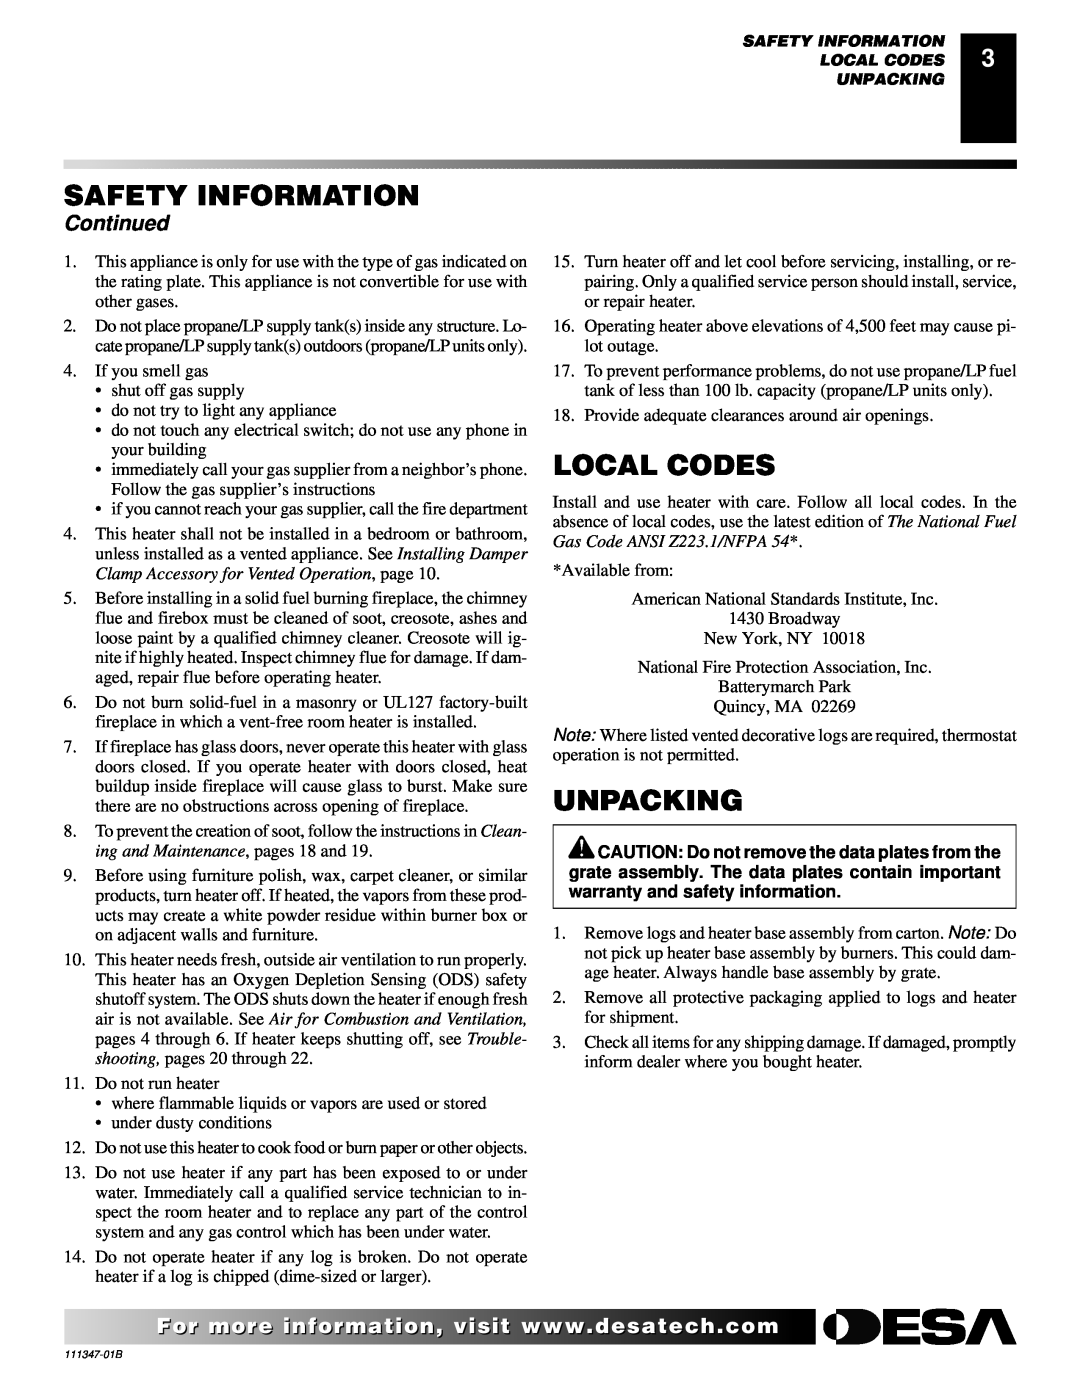 Desa LSL3124N installation manual Local Codes, Unpacking, Continued, Safety Information 